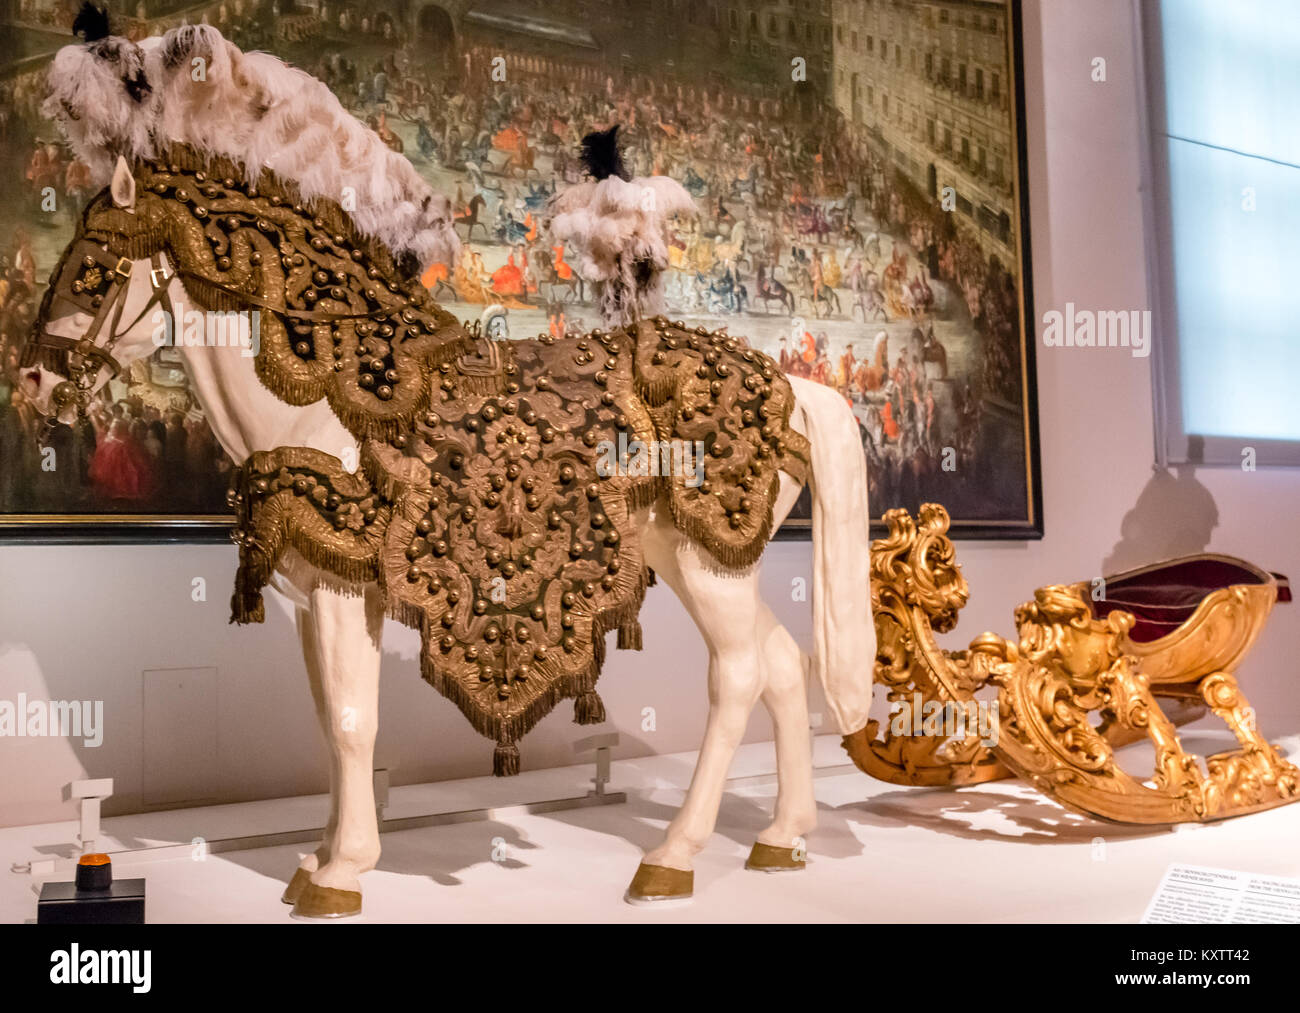 Exhibition of ornately decorated Lipizzan horses used by the Habsburg monarchs, Imperial Carriage Museum, Schönbrunn Palace, Vienna, Austria, Europe Stock Photo